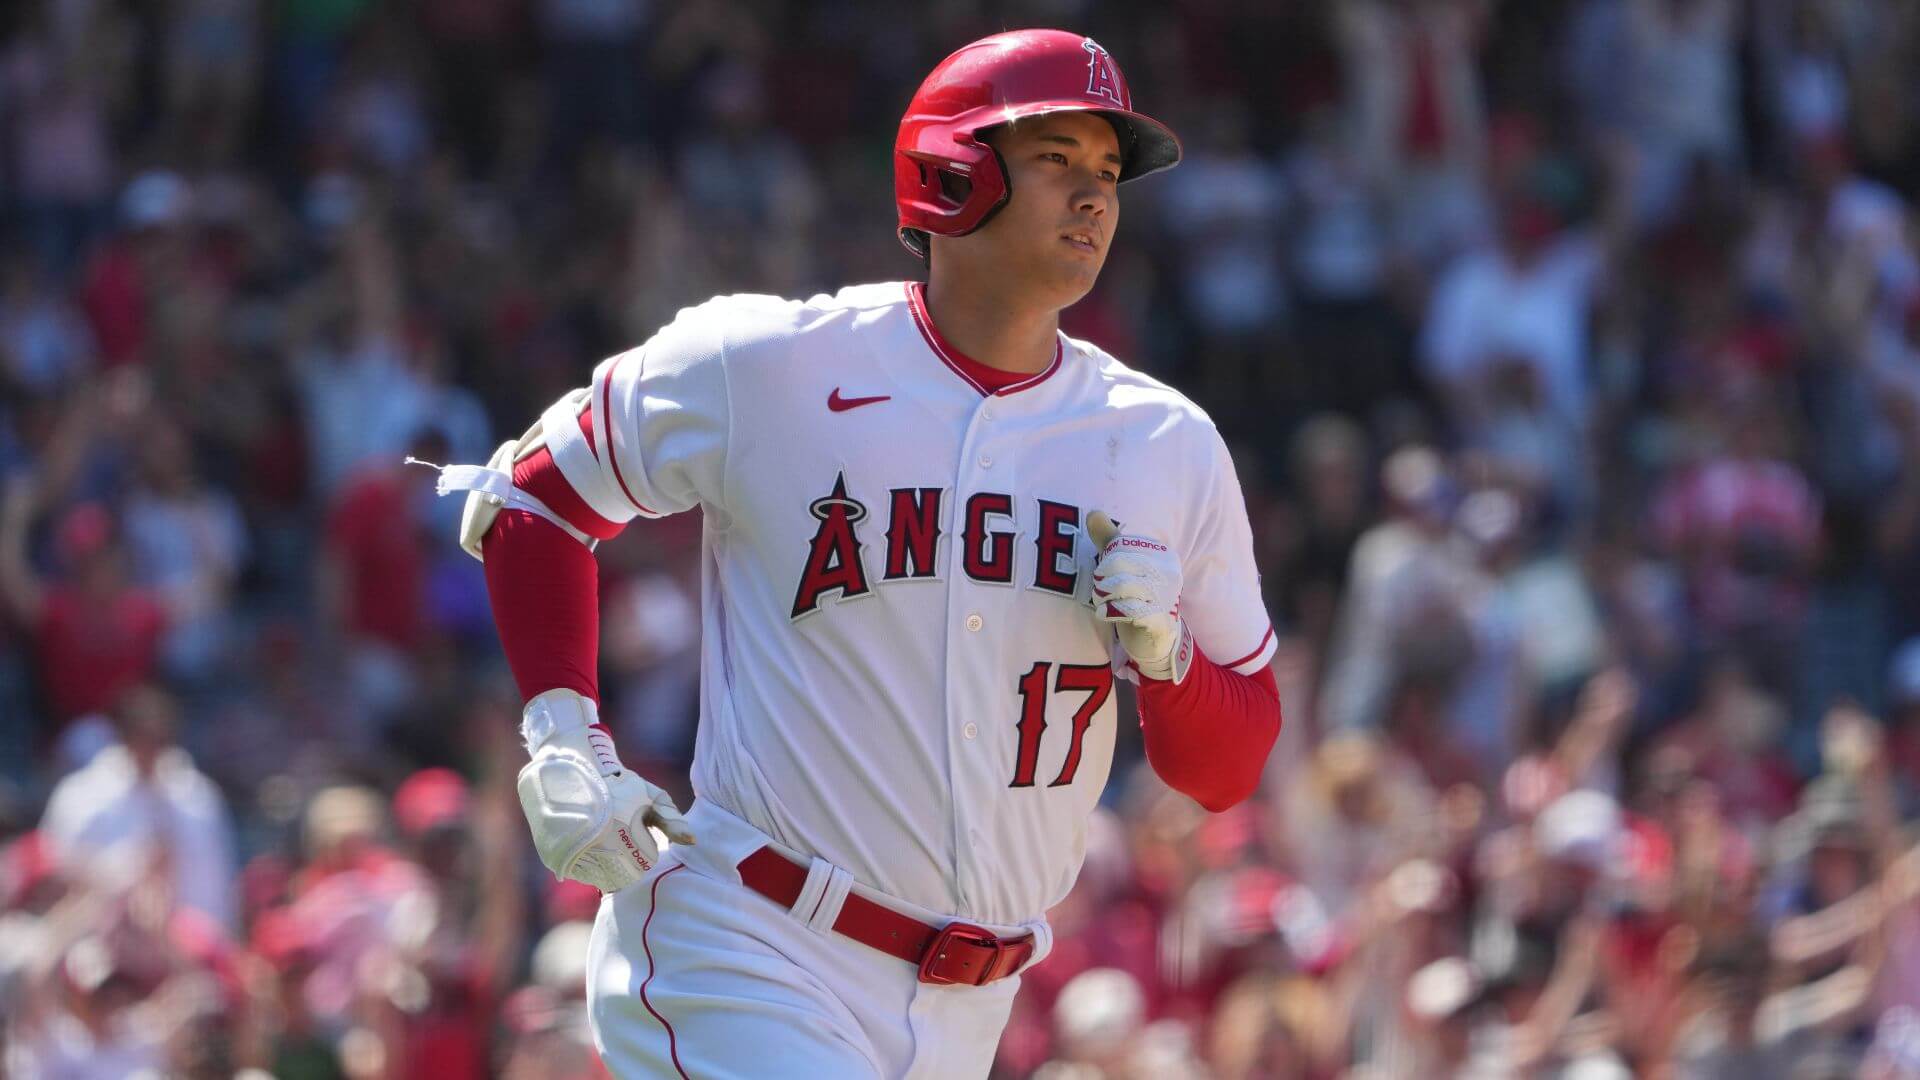 Odds For Shohei Ohtani to Break the American League Home Run Record in 2023